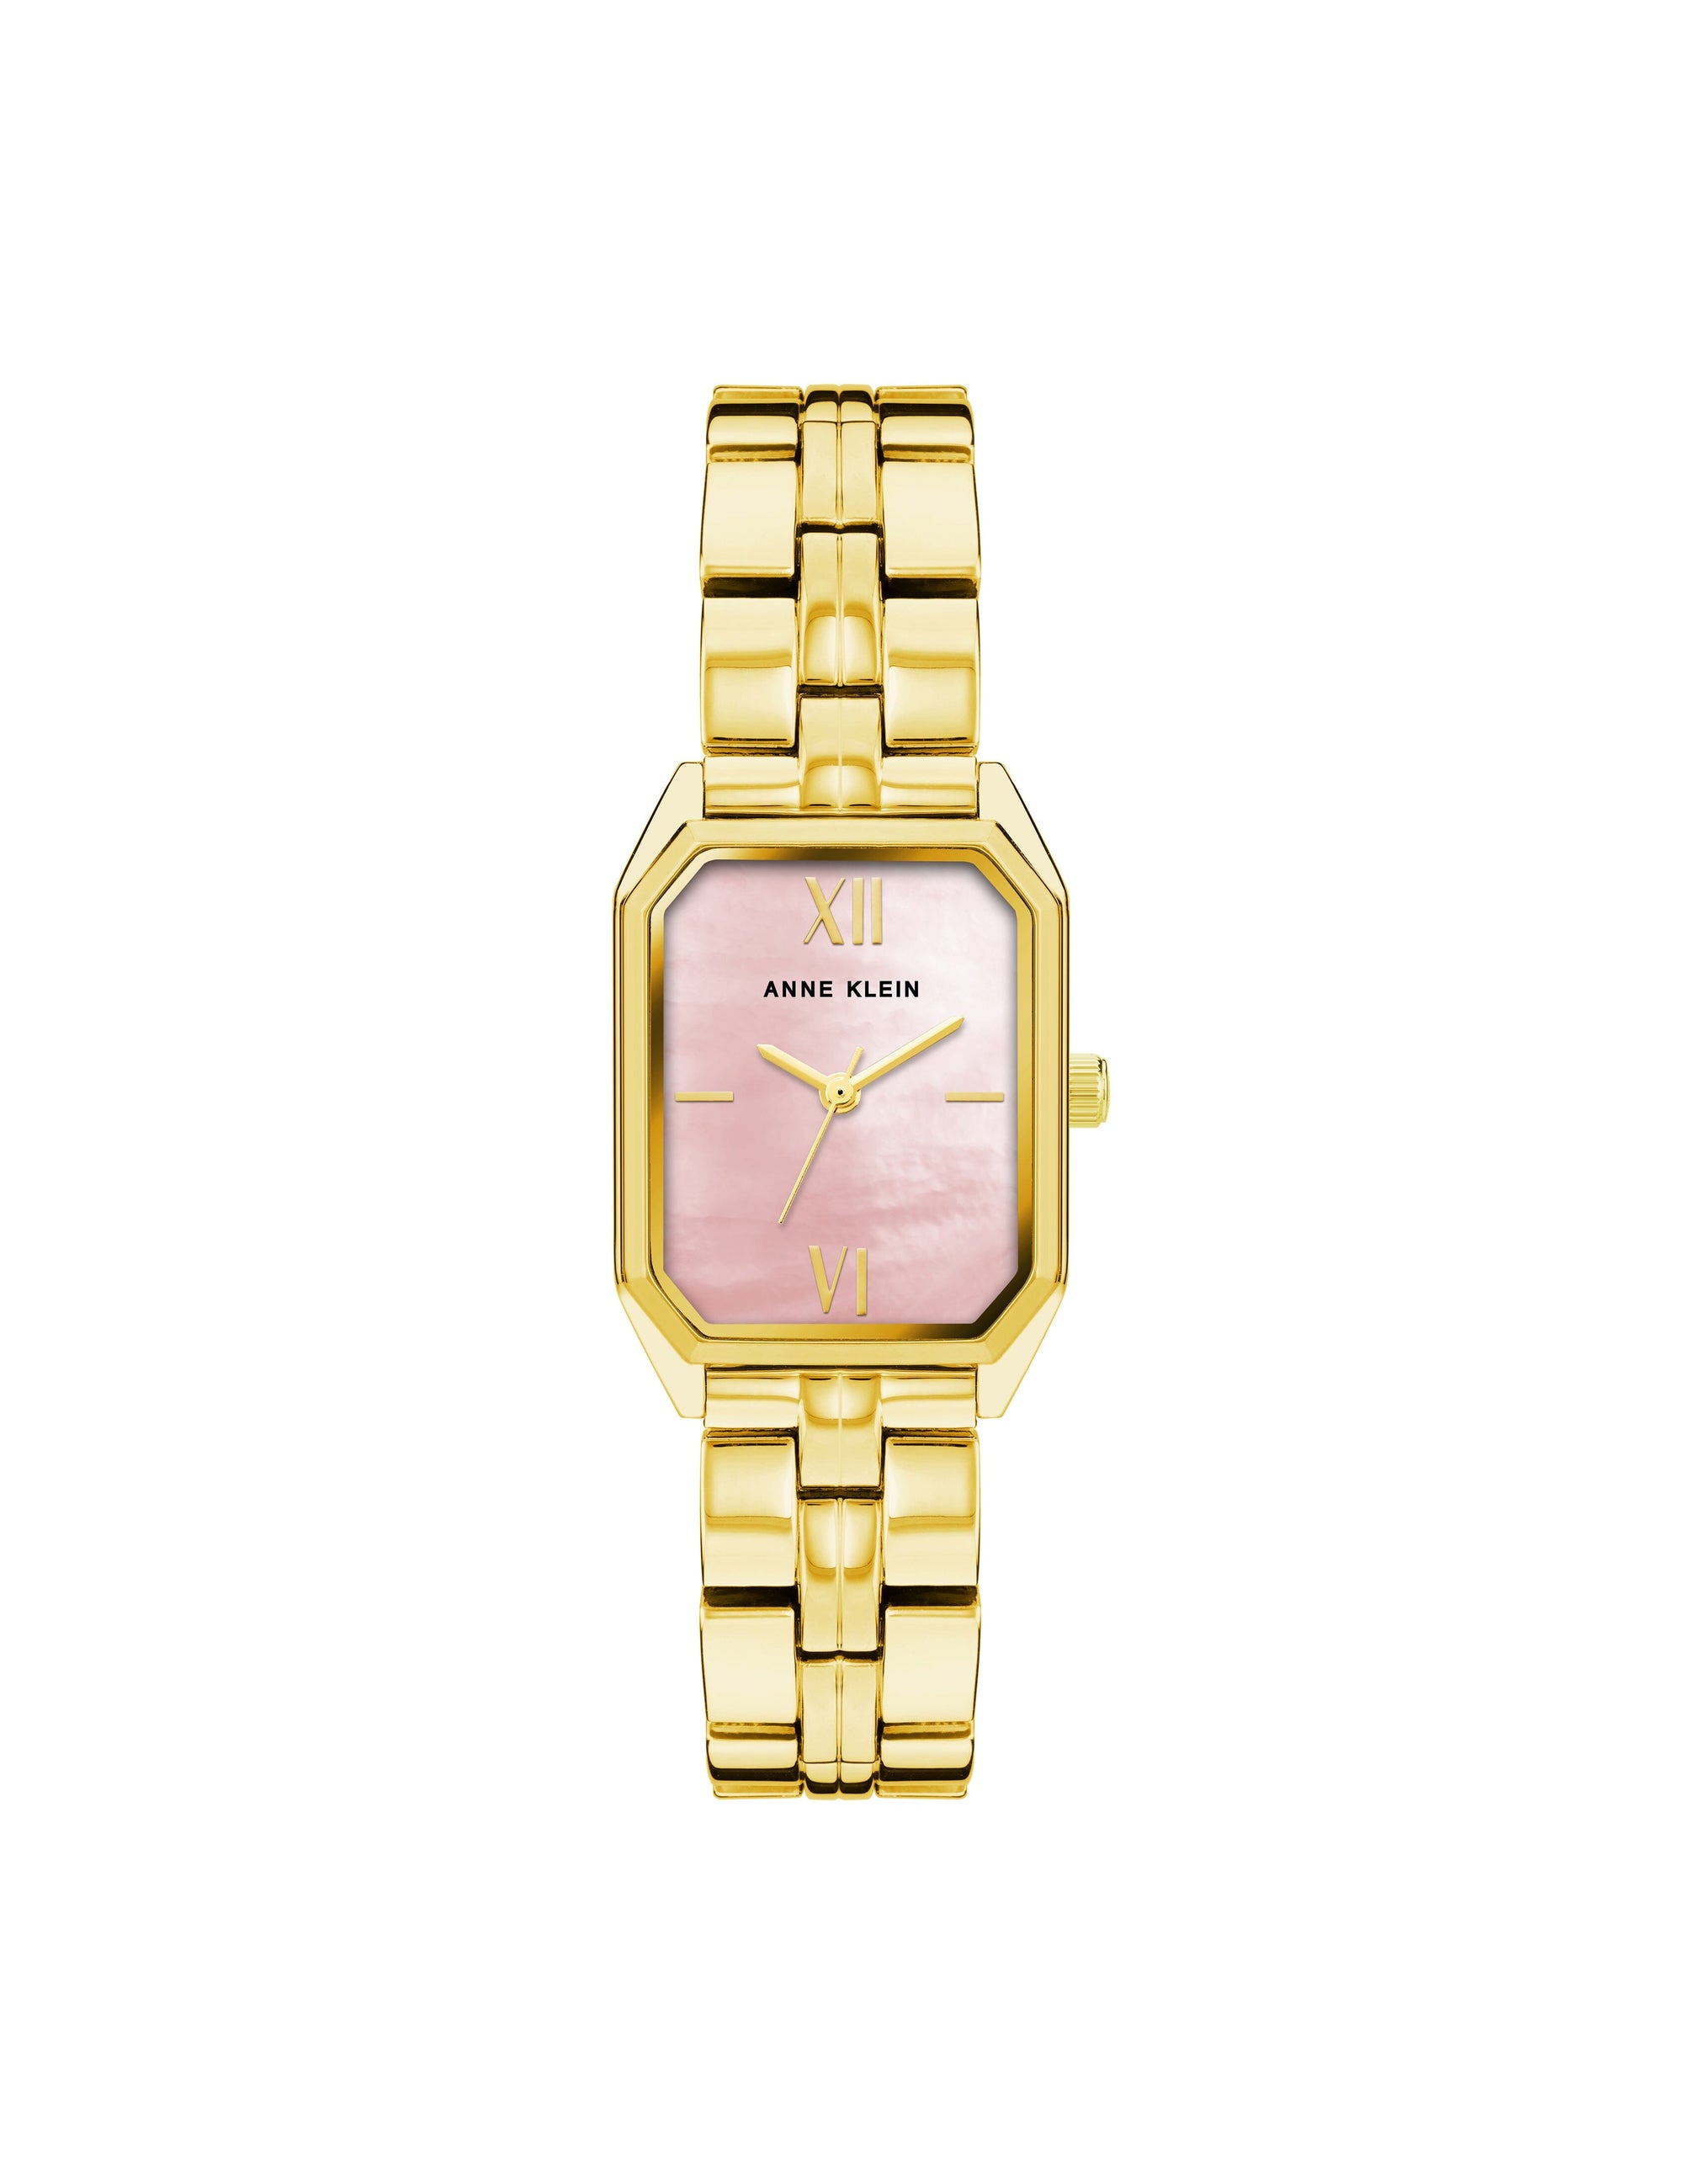 Shop OWS and feel empowered with new Anne Klein leather bracelet  rectangular dial watch https://pk.ows.shop/search?s=AK-3752RGTP Model N...  | Instagram